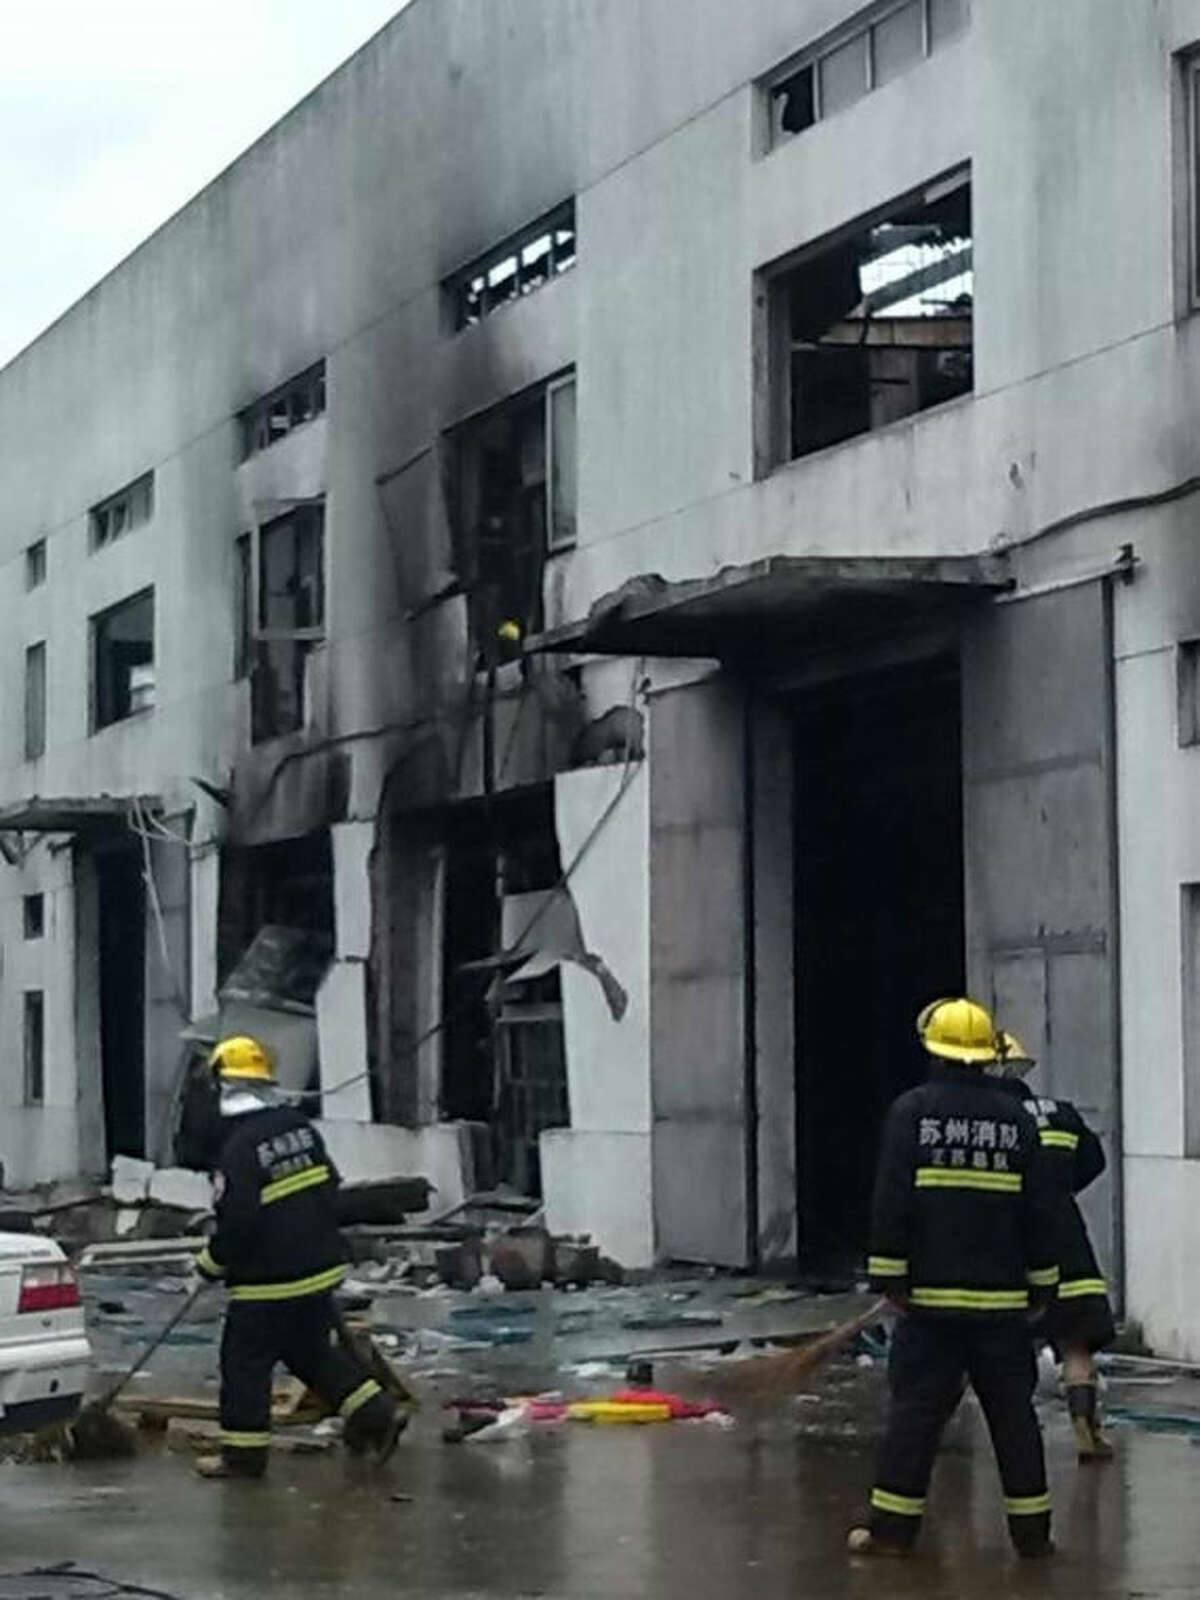 This photo released by China's Xinhua News Agency shows the site of an explosion at an eastern Chinese automotive parts factory in Kunshan City, Jiangsu Province Saturday, Aug. 2, 2014. Dozens of people were killed Saturday by the explosion at the factory that supplies General Motors, state media reported. (AP Photo/Xinhua, Wang Hengzhi) NO SALES